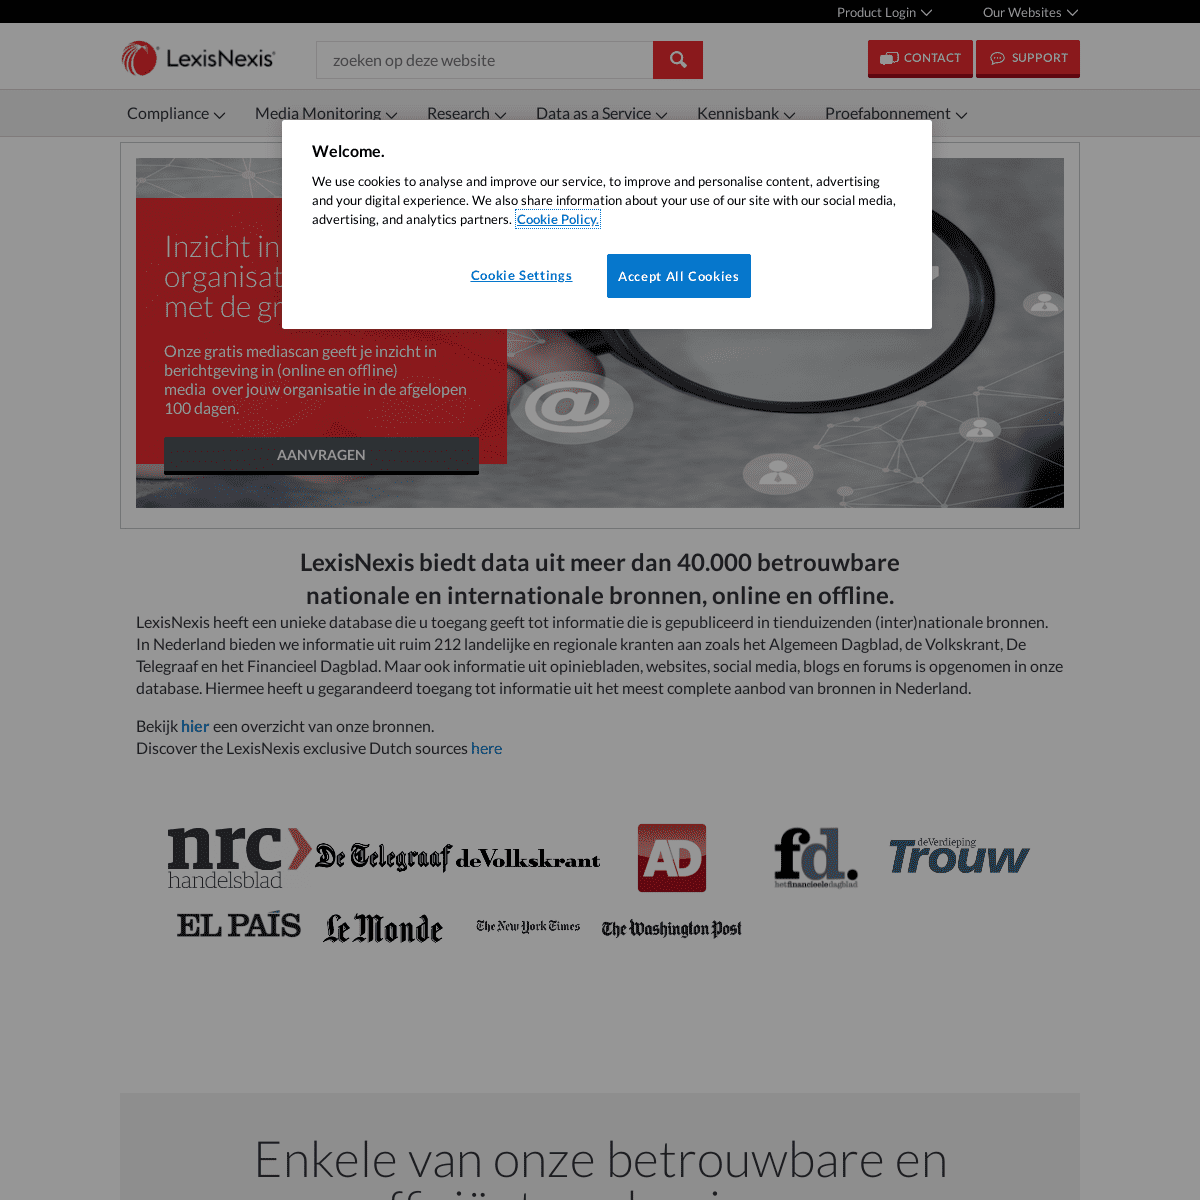 A complete backup of https://lexisnexis.nl